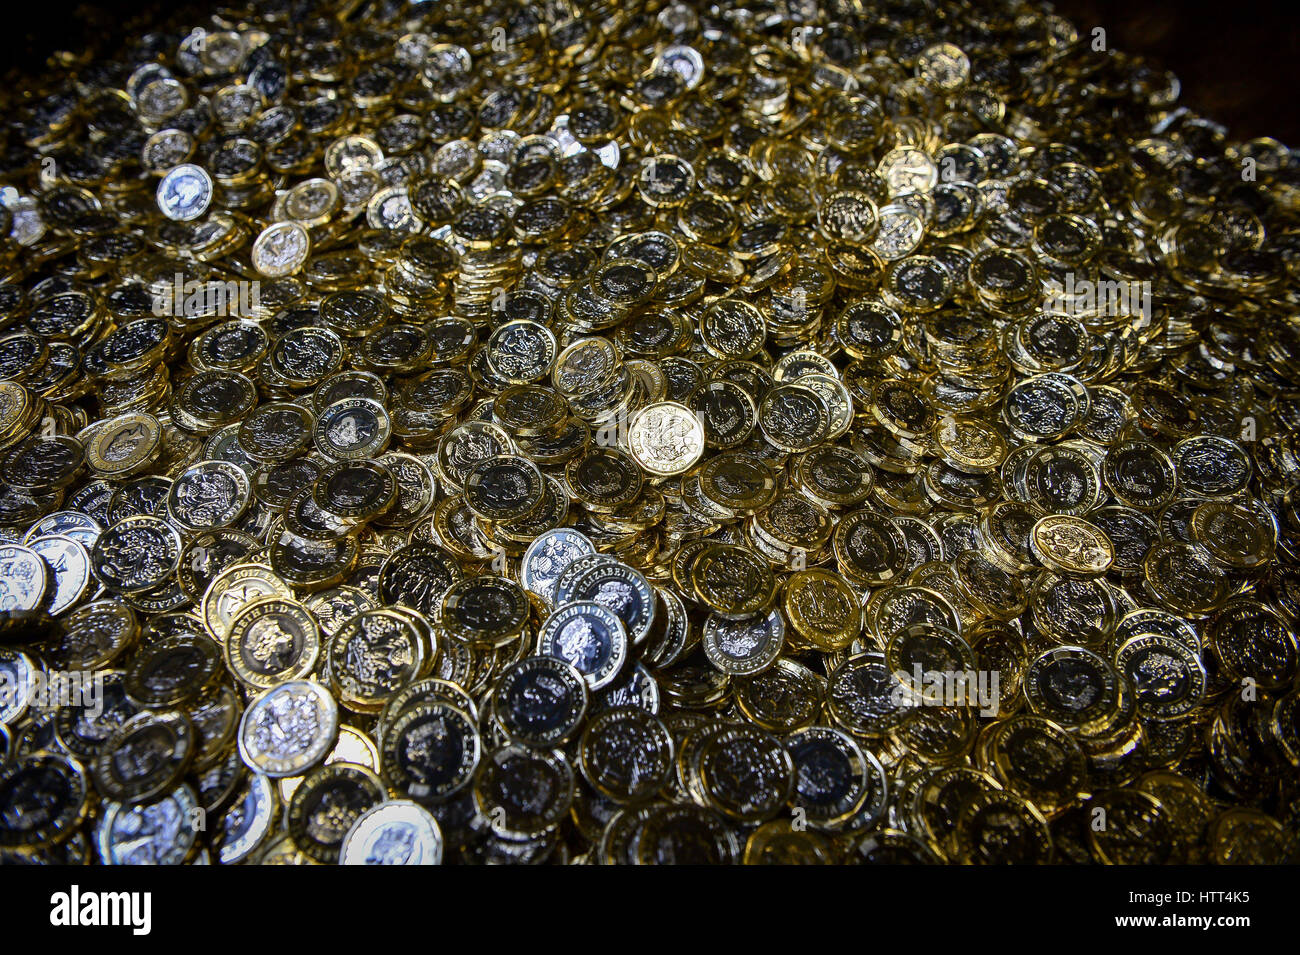 Editorial Use only &ETH; NO COMMERCIAL USE New 12-sided one pound coins fall into a metal crate as they are minted at the Royal Mint in Llantrisant, Wales. Stock Photo